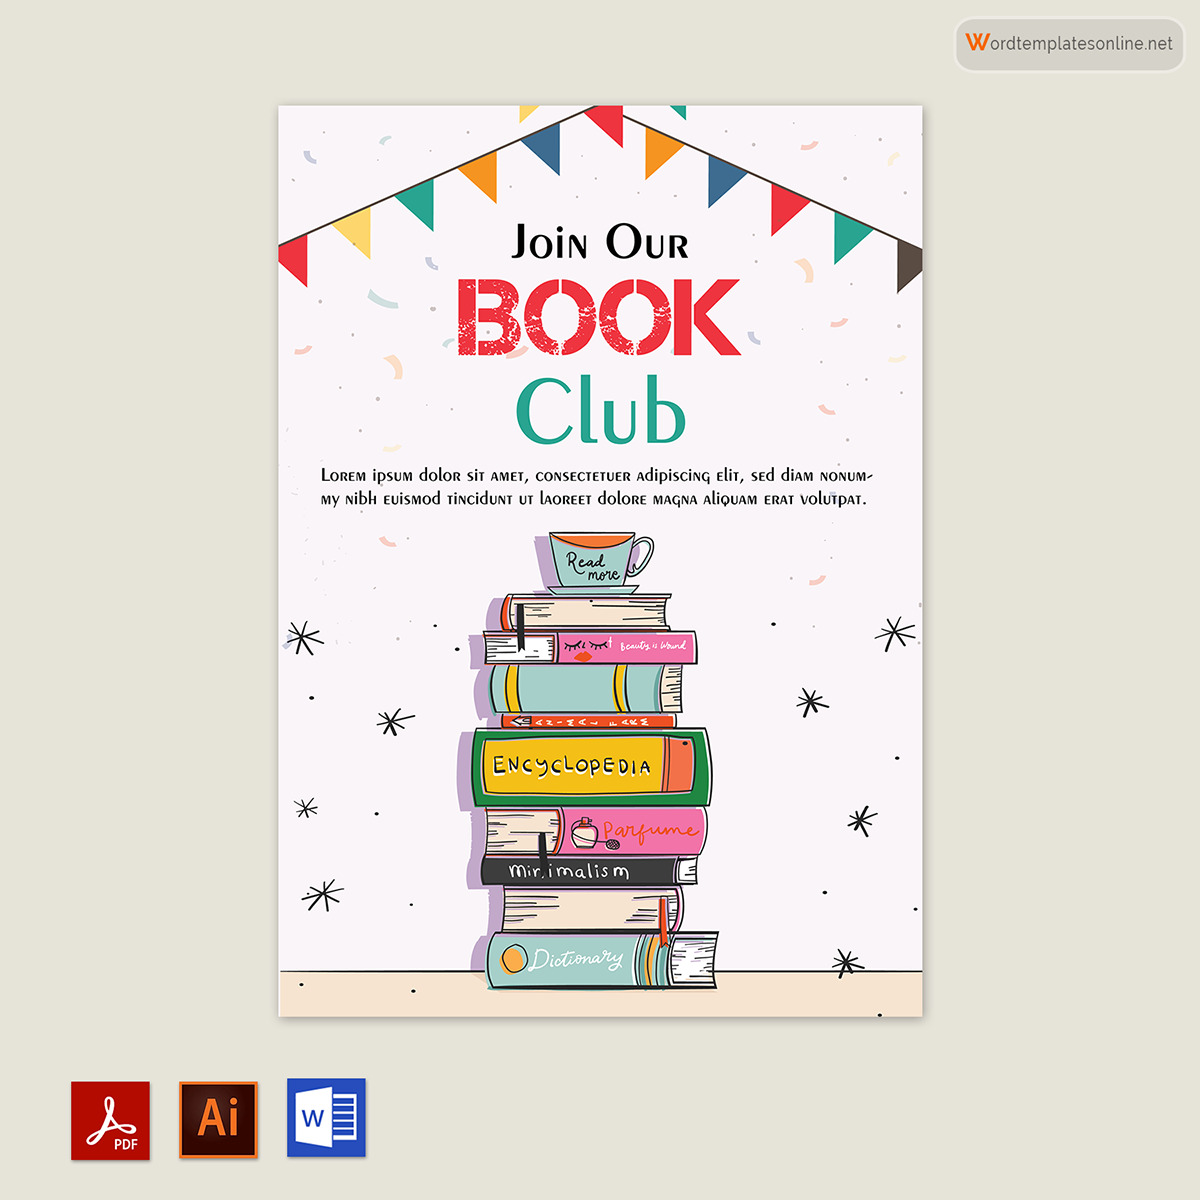 Book Club Flyer Templates - Free Word, PSD, AI Example